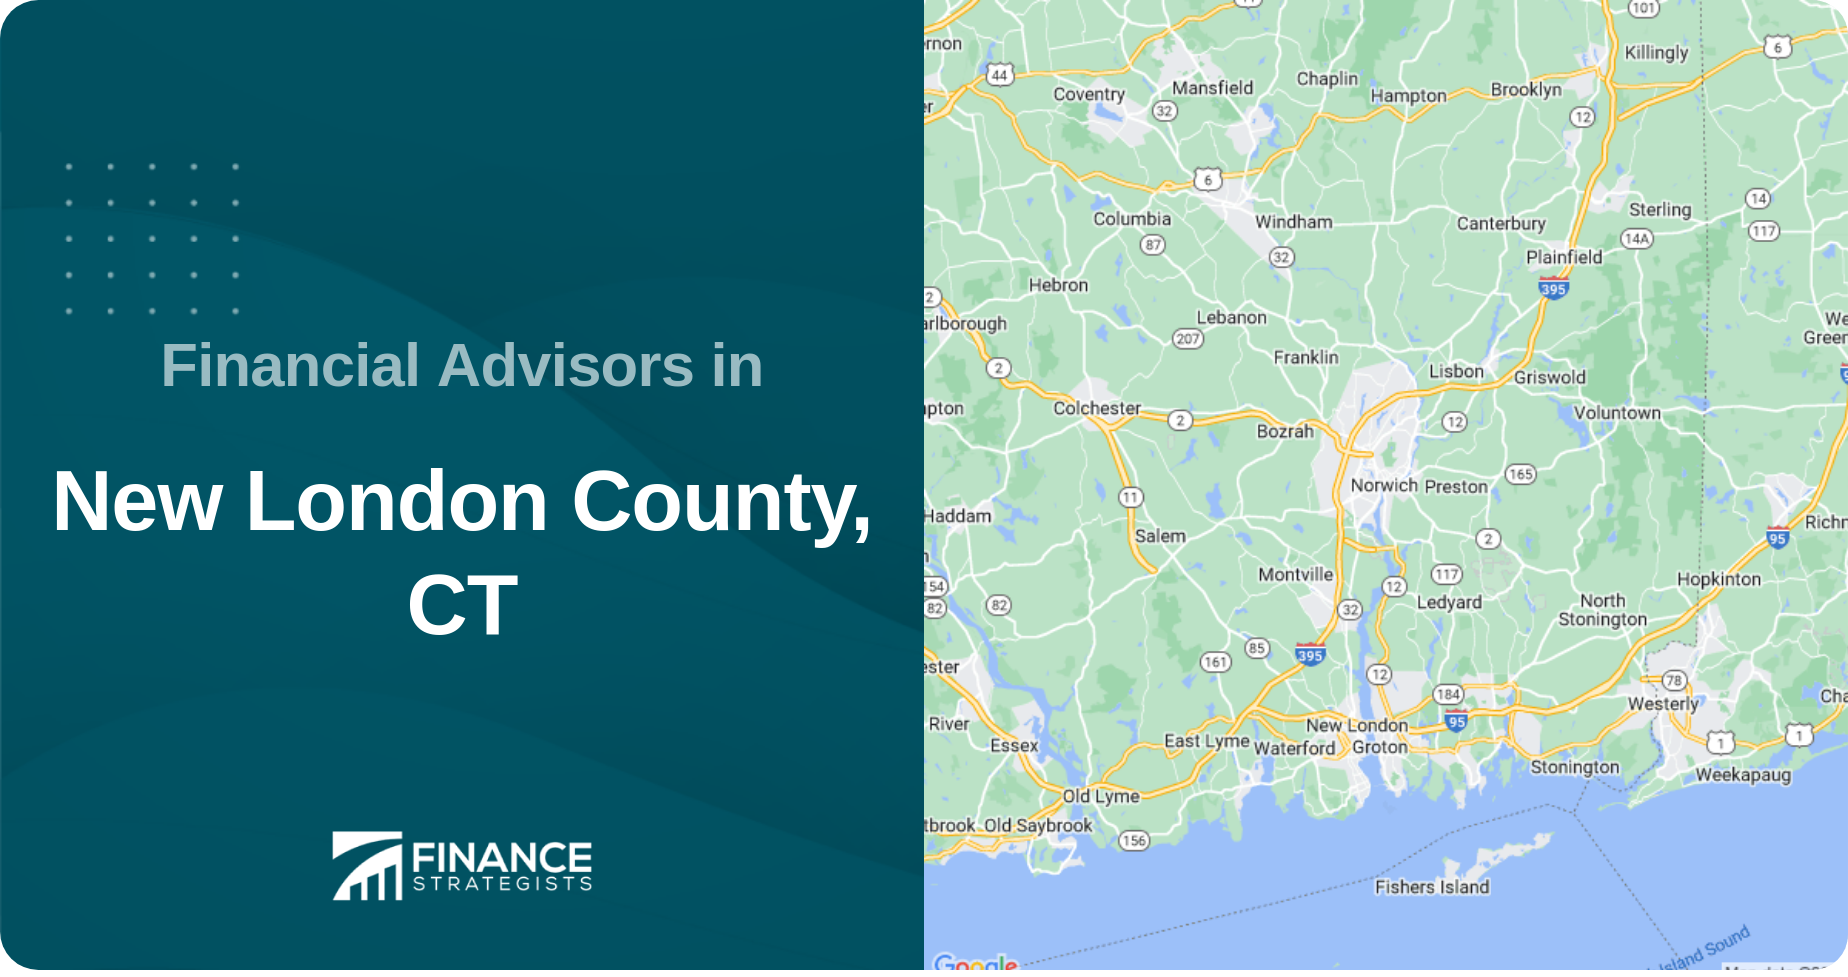 Financial Advisors in New London County, CT